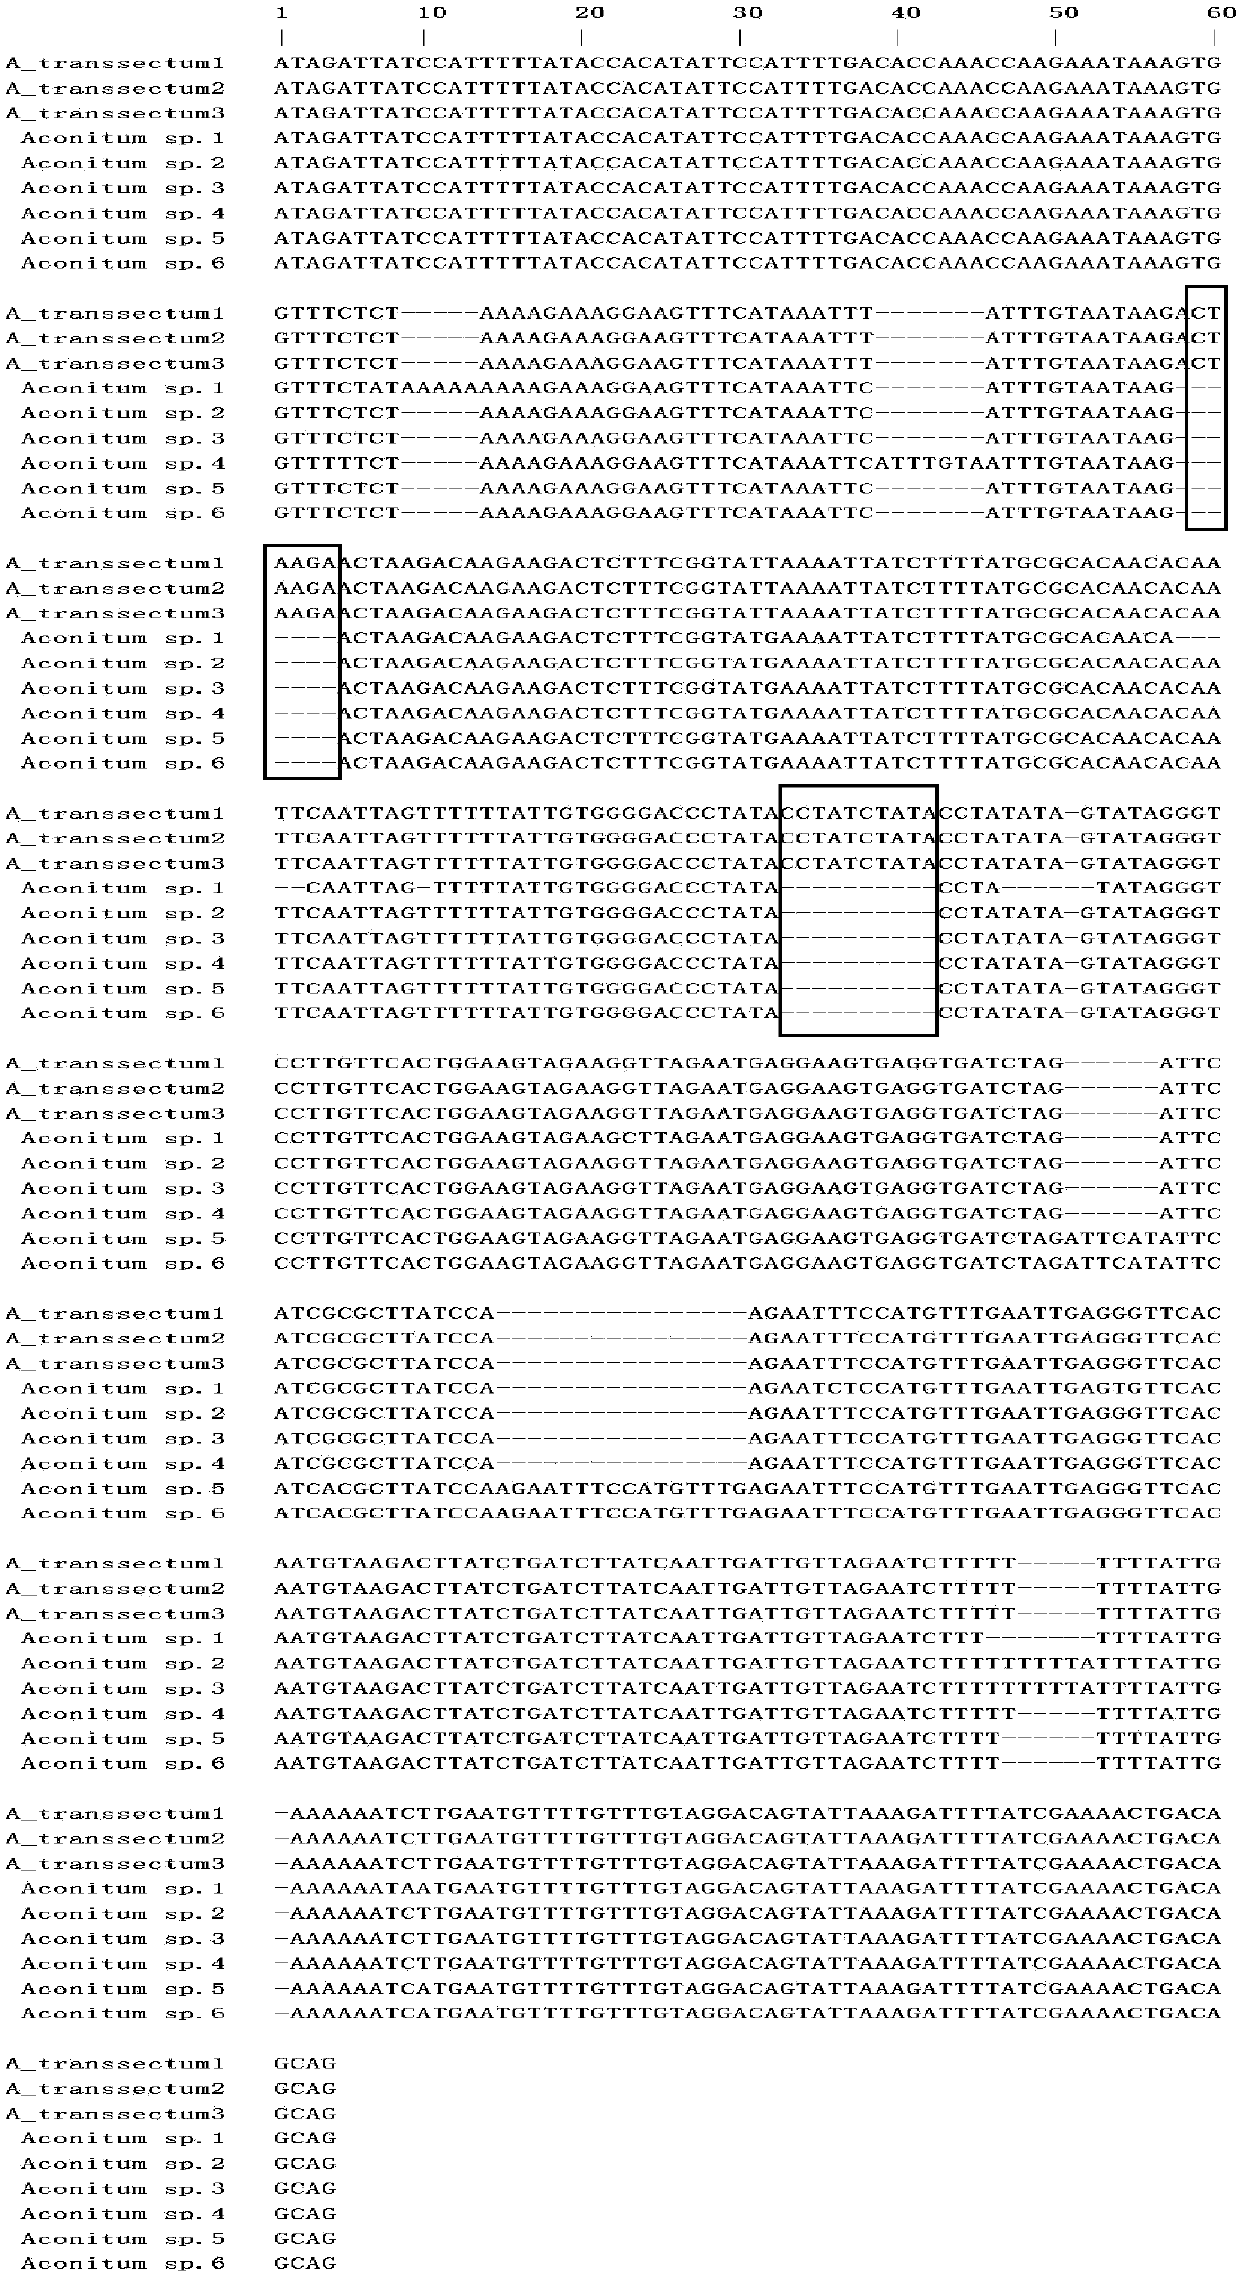 Big data based identification method for aconitum transsectum DNA barcode and aconitum transsectum